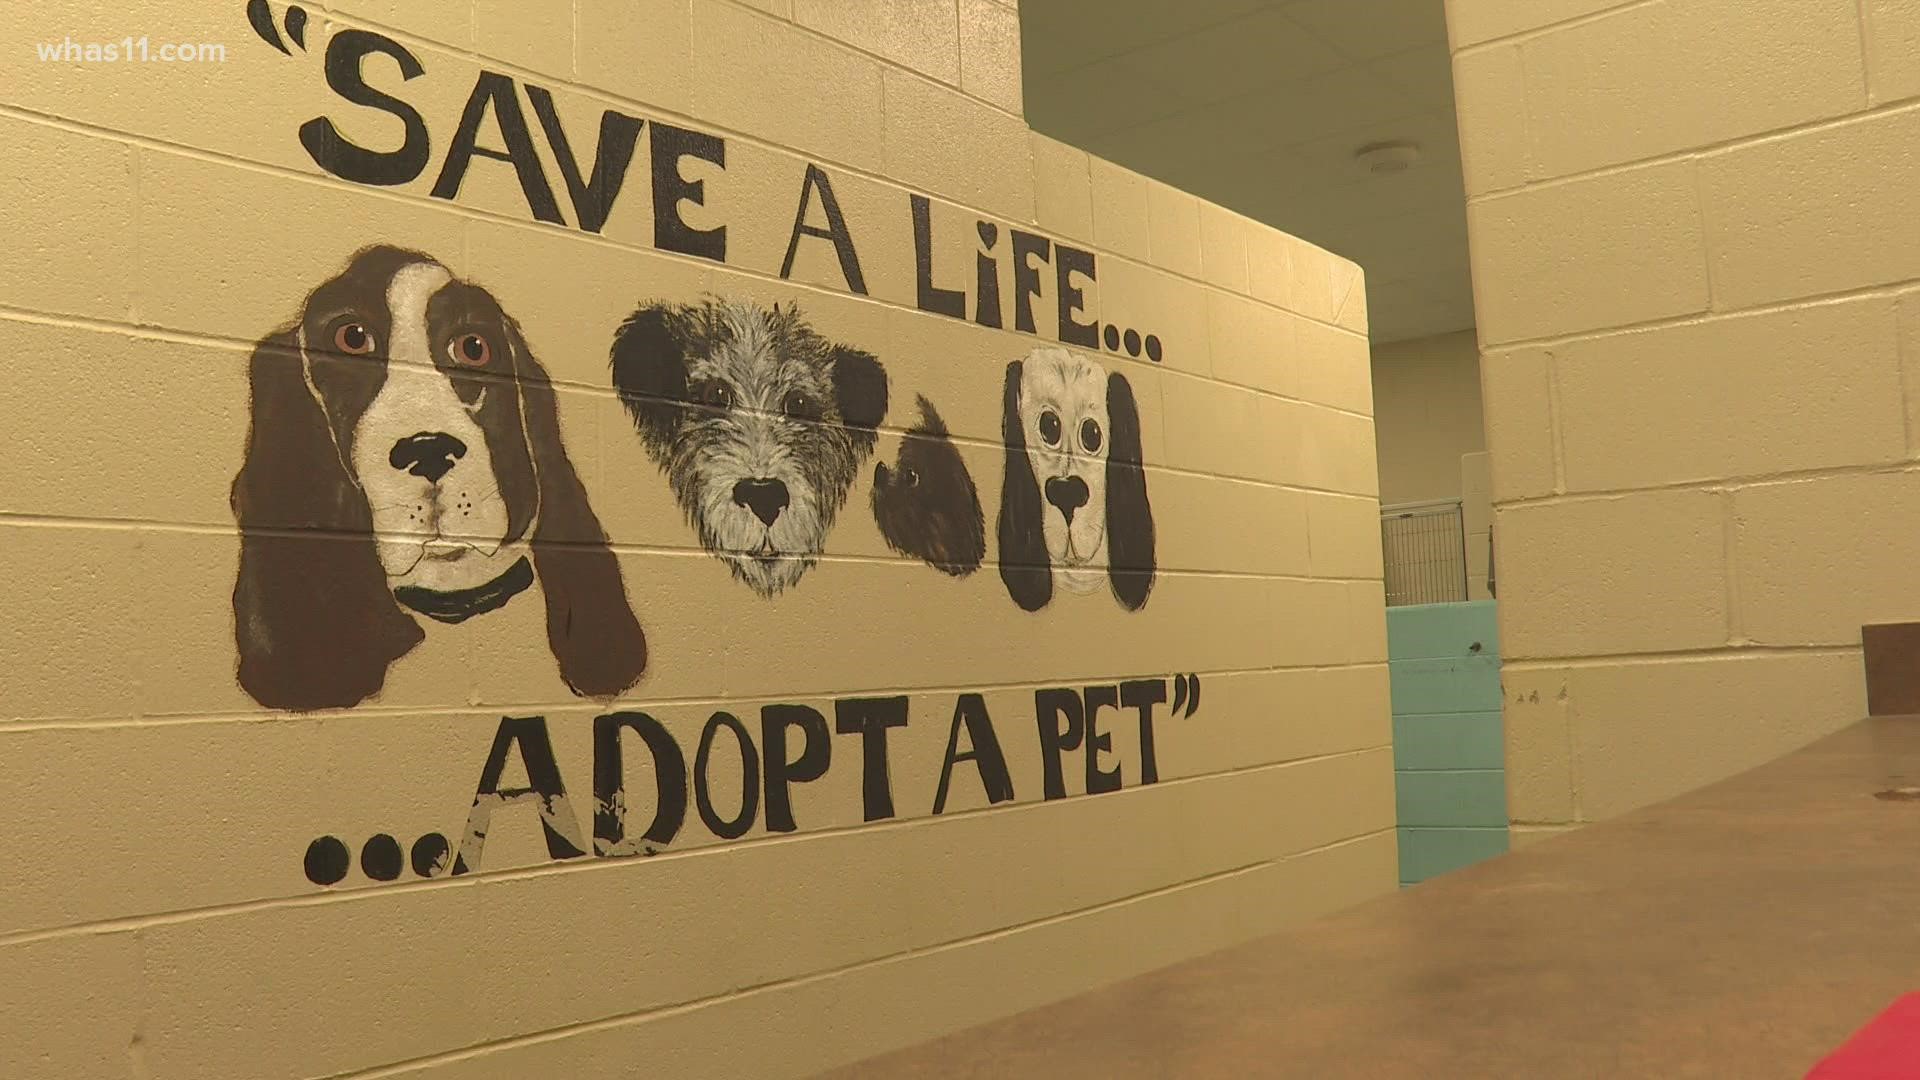 if you're looking to get a furry friend and you see one up for sale in public space you may want to think again. The council is seeking to eliminate puppy mills.